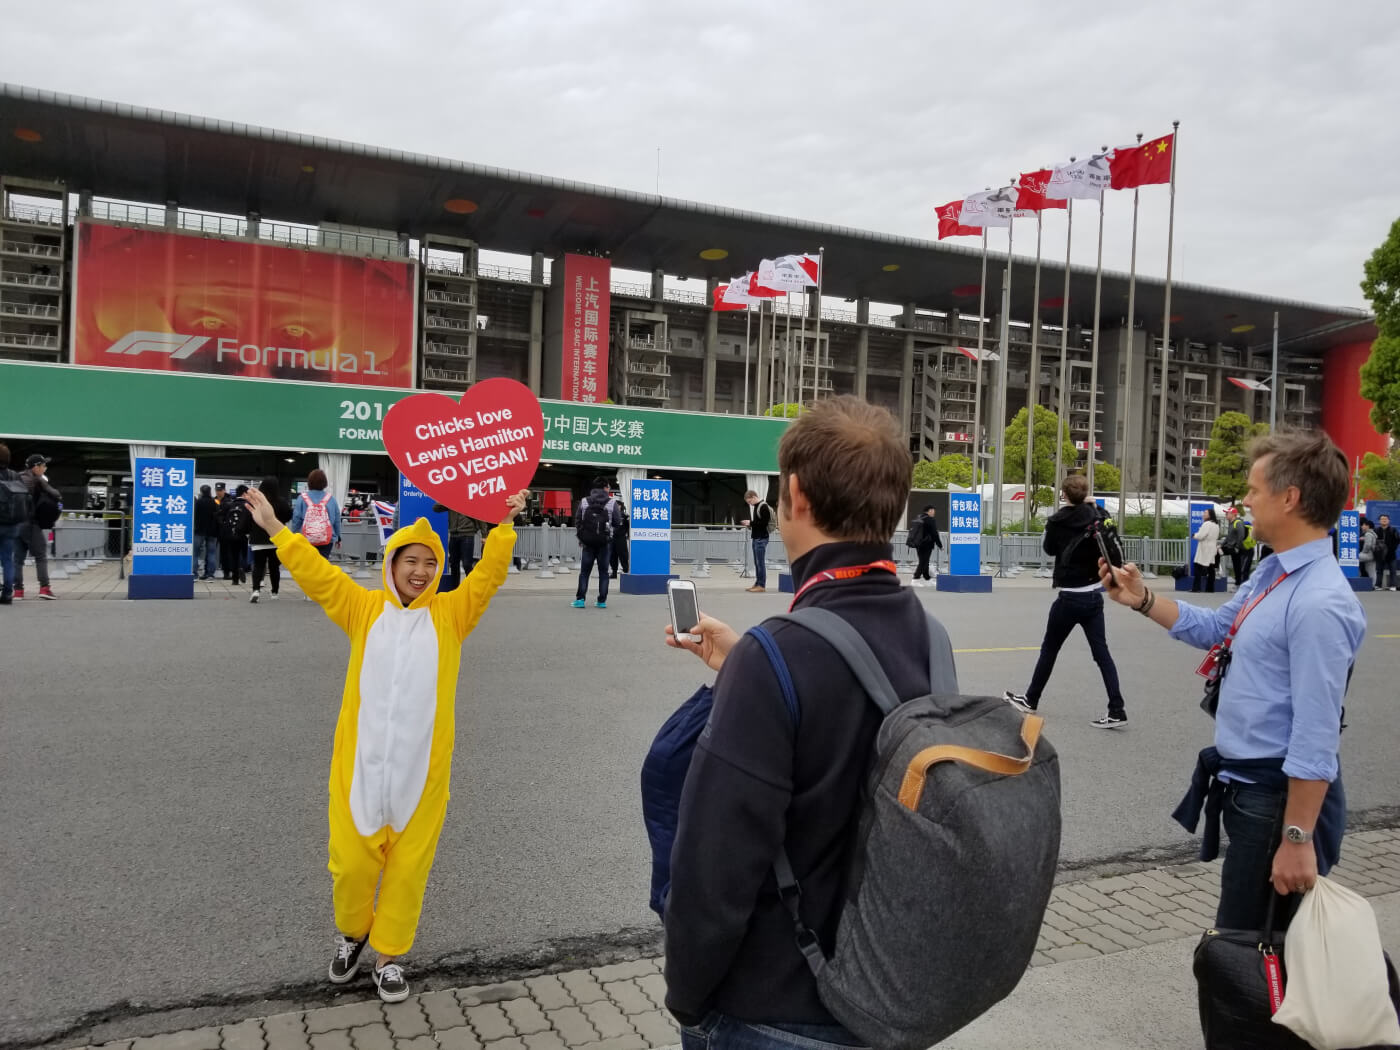 PHOTOS: Cute ‘Chick’ Cheers On Lewis Hamilton at the Formula 1 Chinese Grand Prix